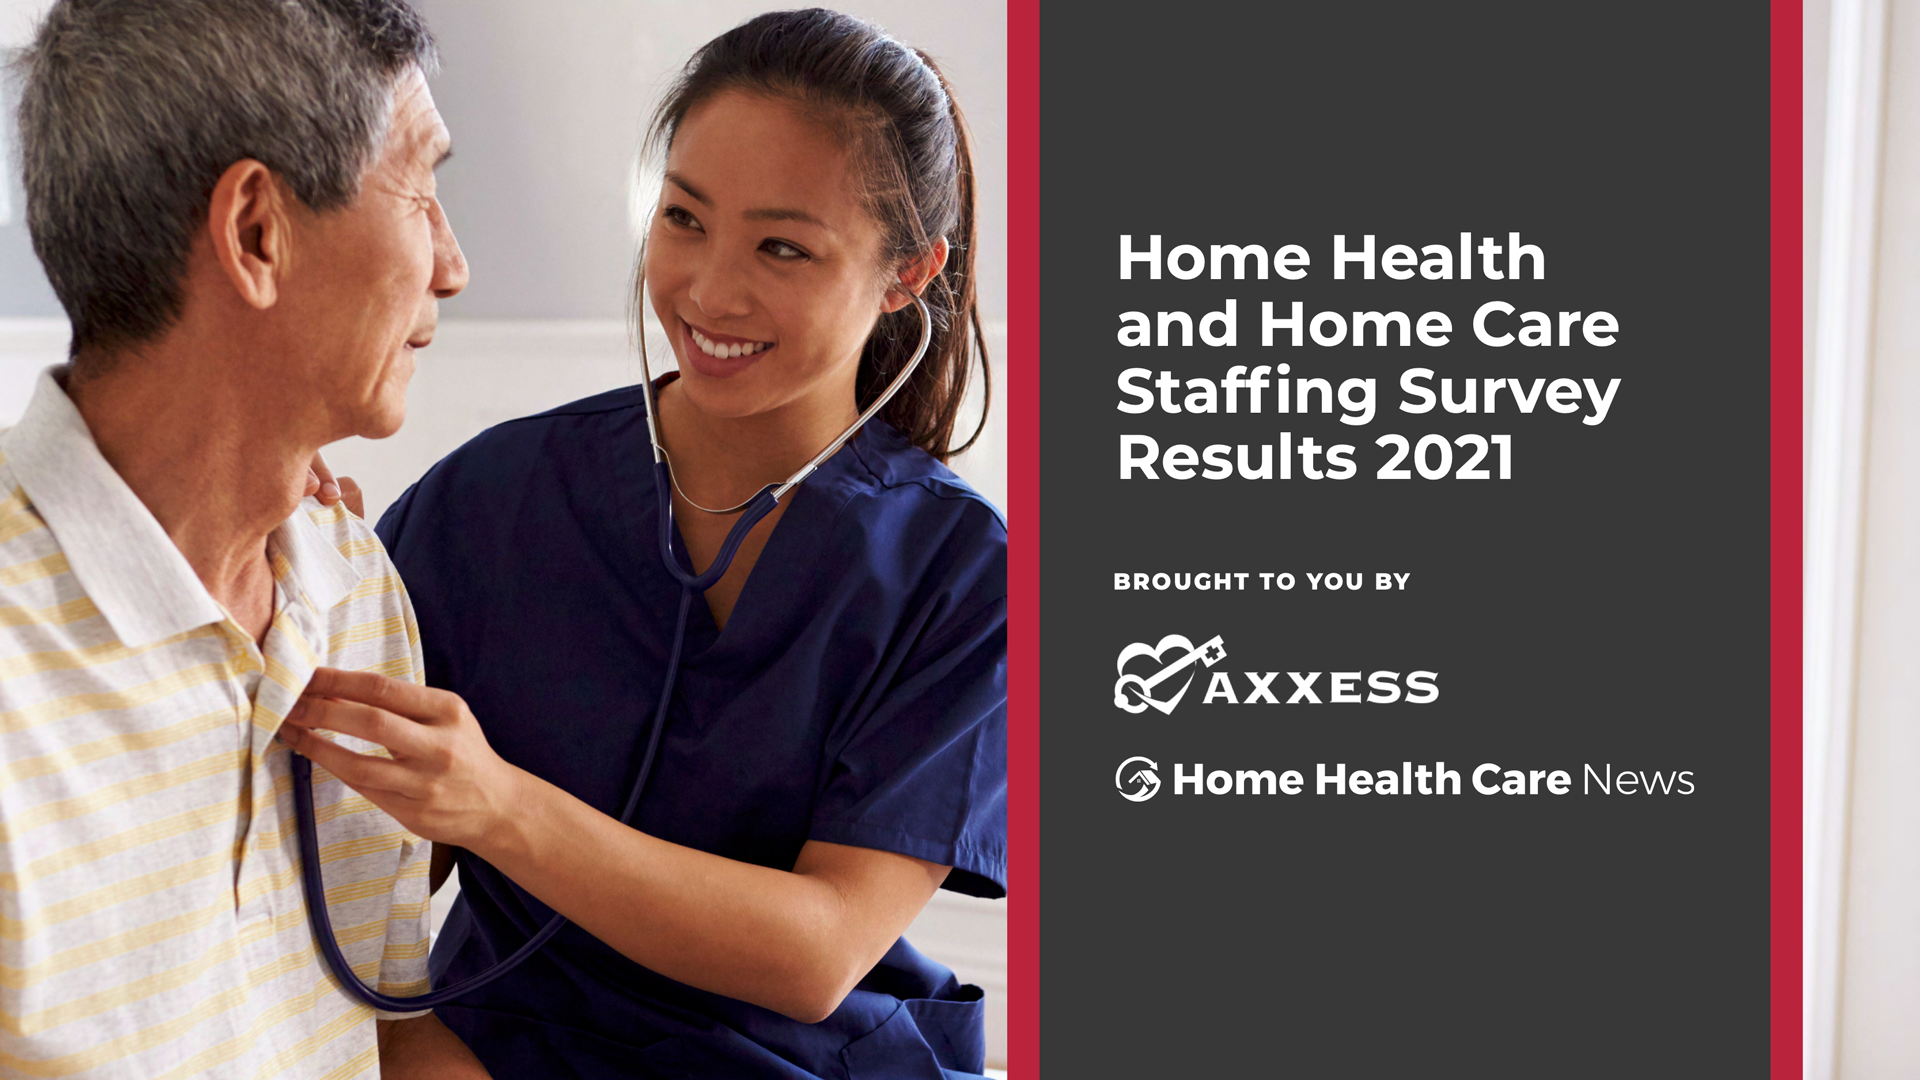 Home Health and Home Care Staffing Survey 2021